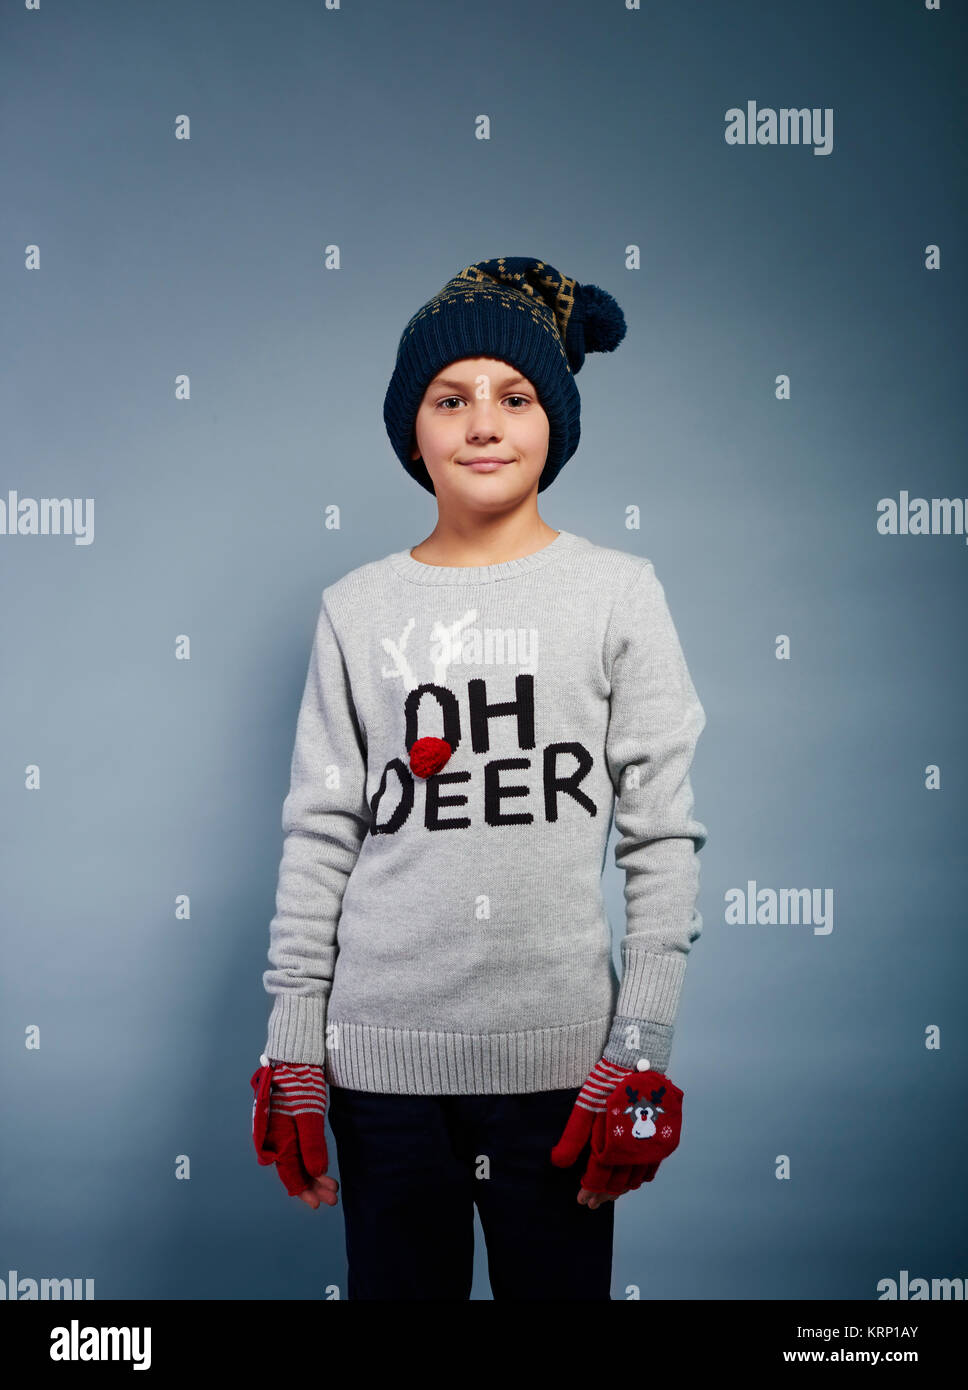 Cheerful boy with glove and knit hat Stock Photo